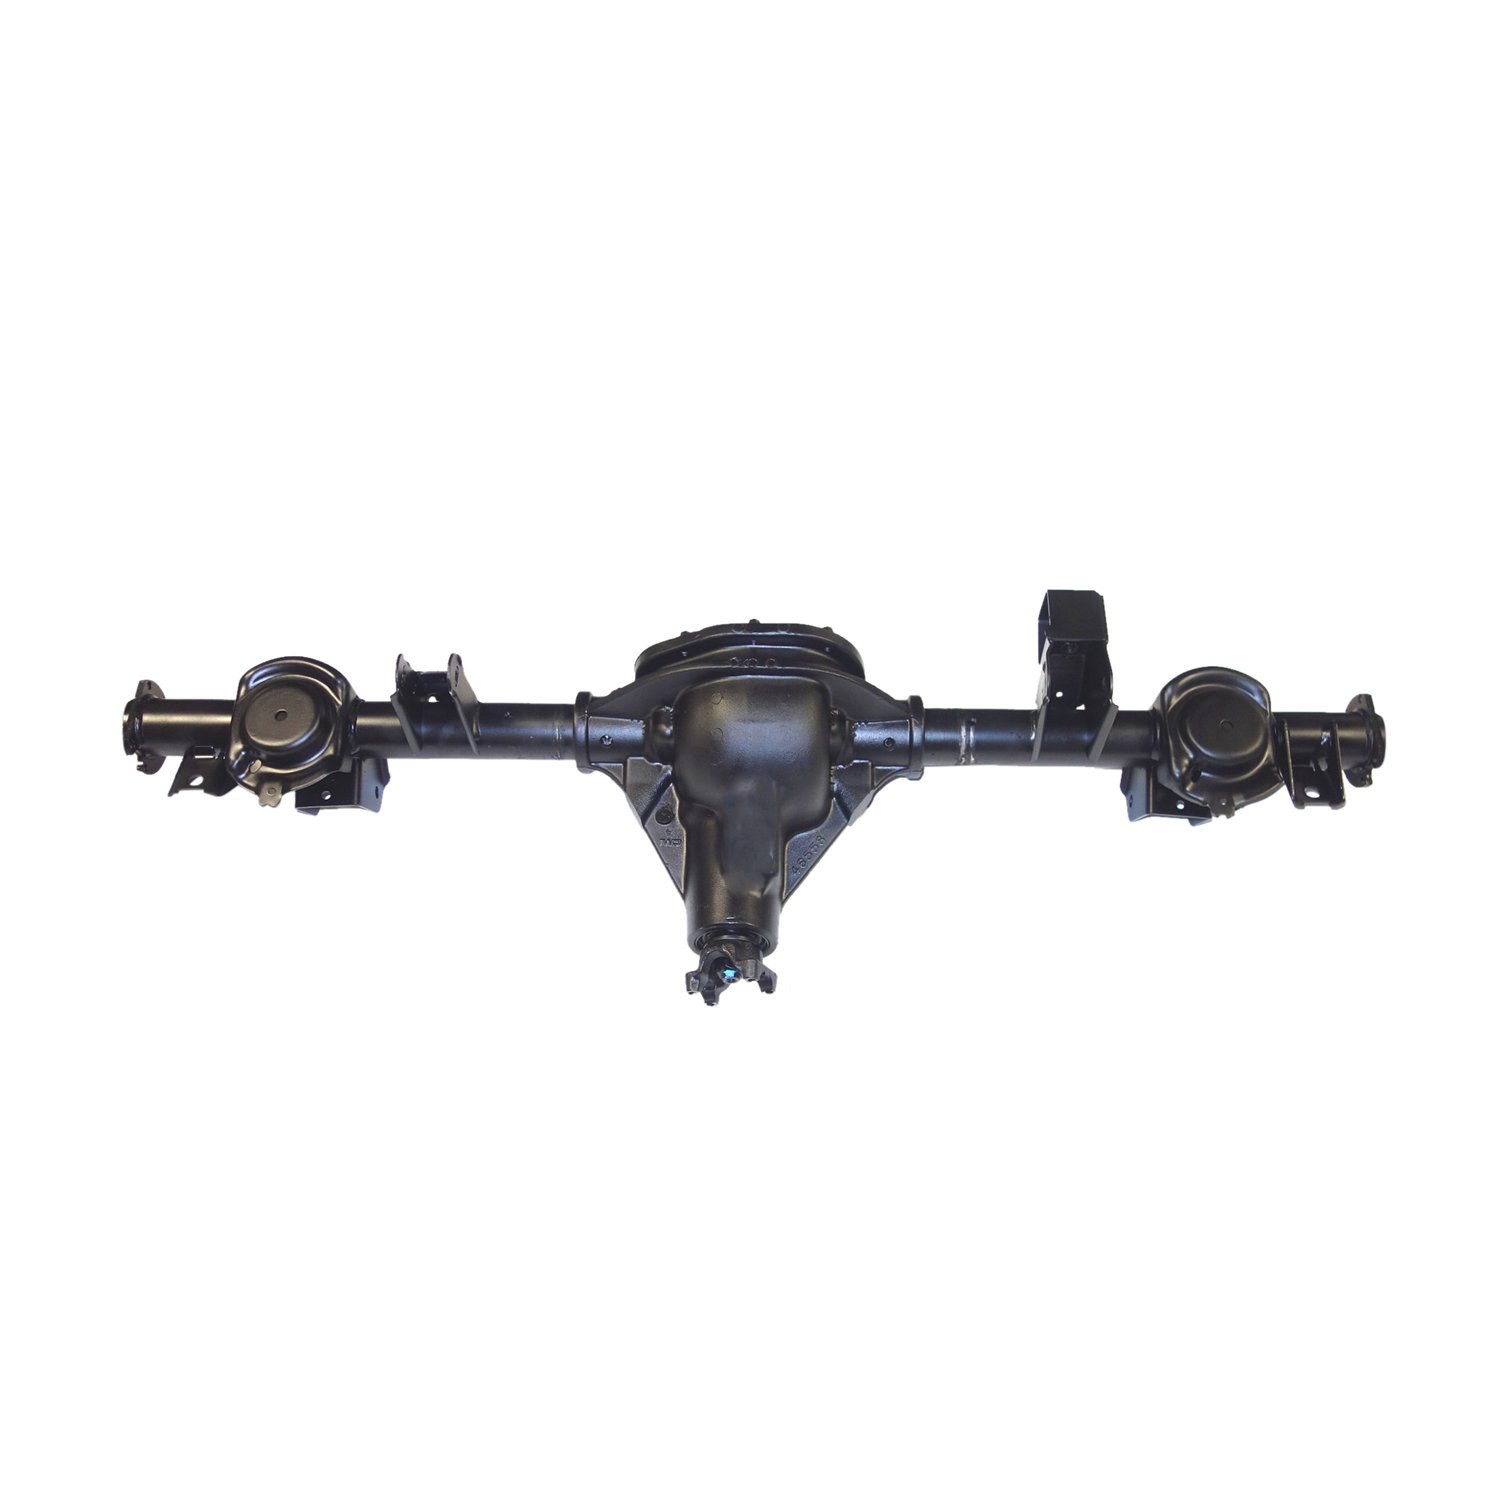 Remanufactured Complete Axle Assembly for Dana 44 96-98 Grand Cherokee 3.54 , Disc Brake